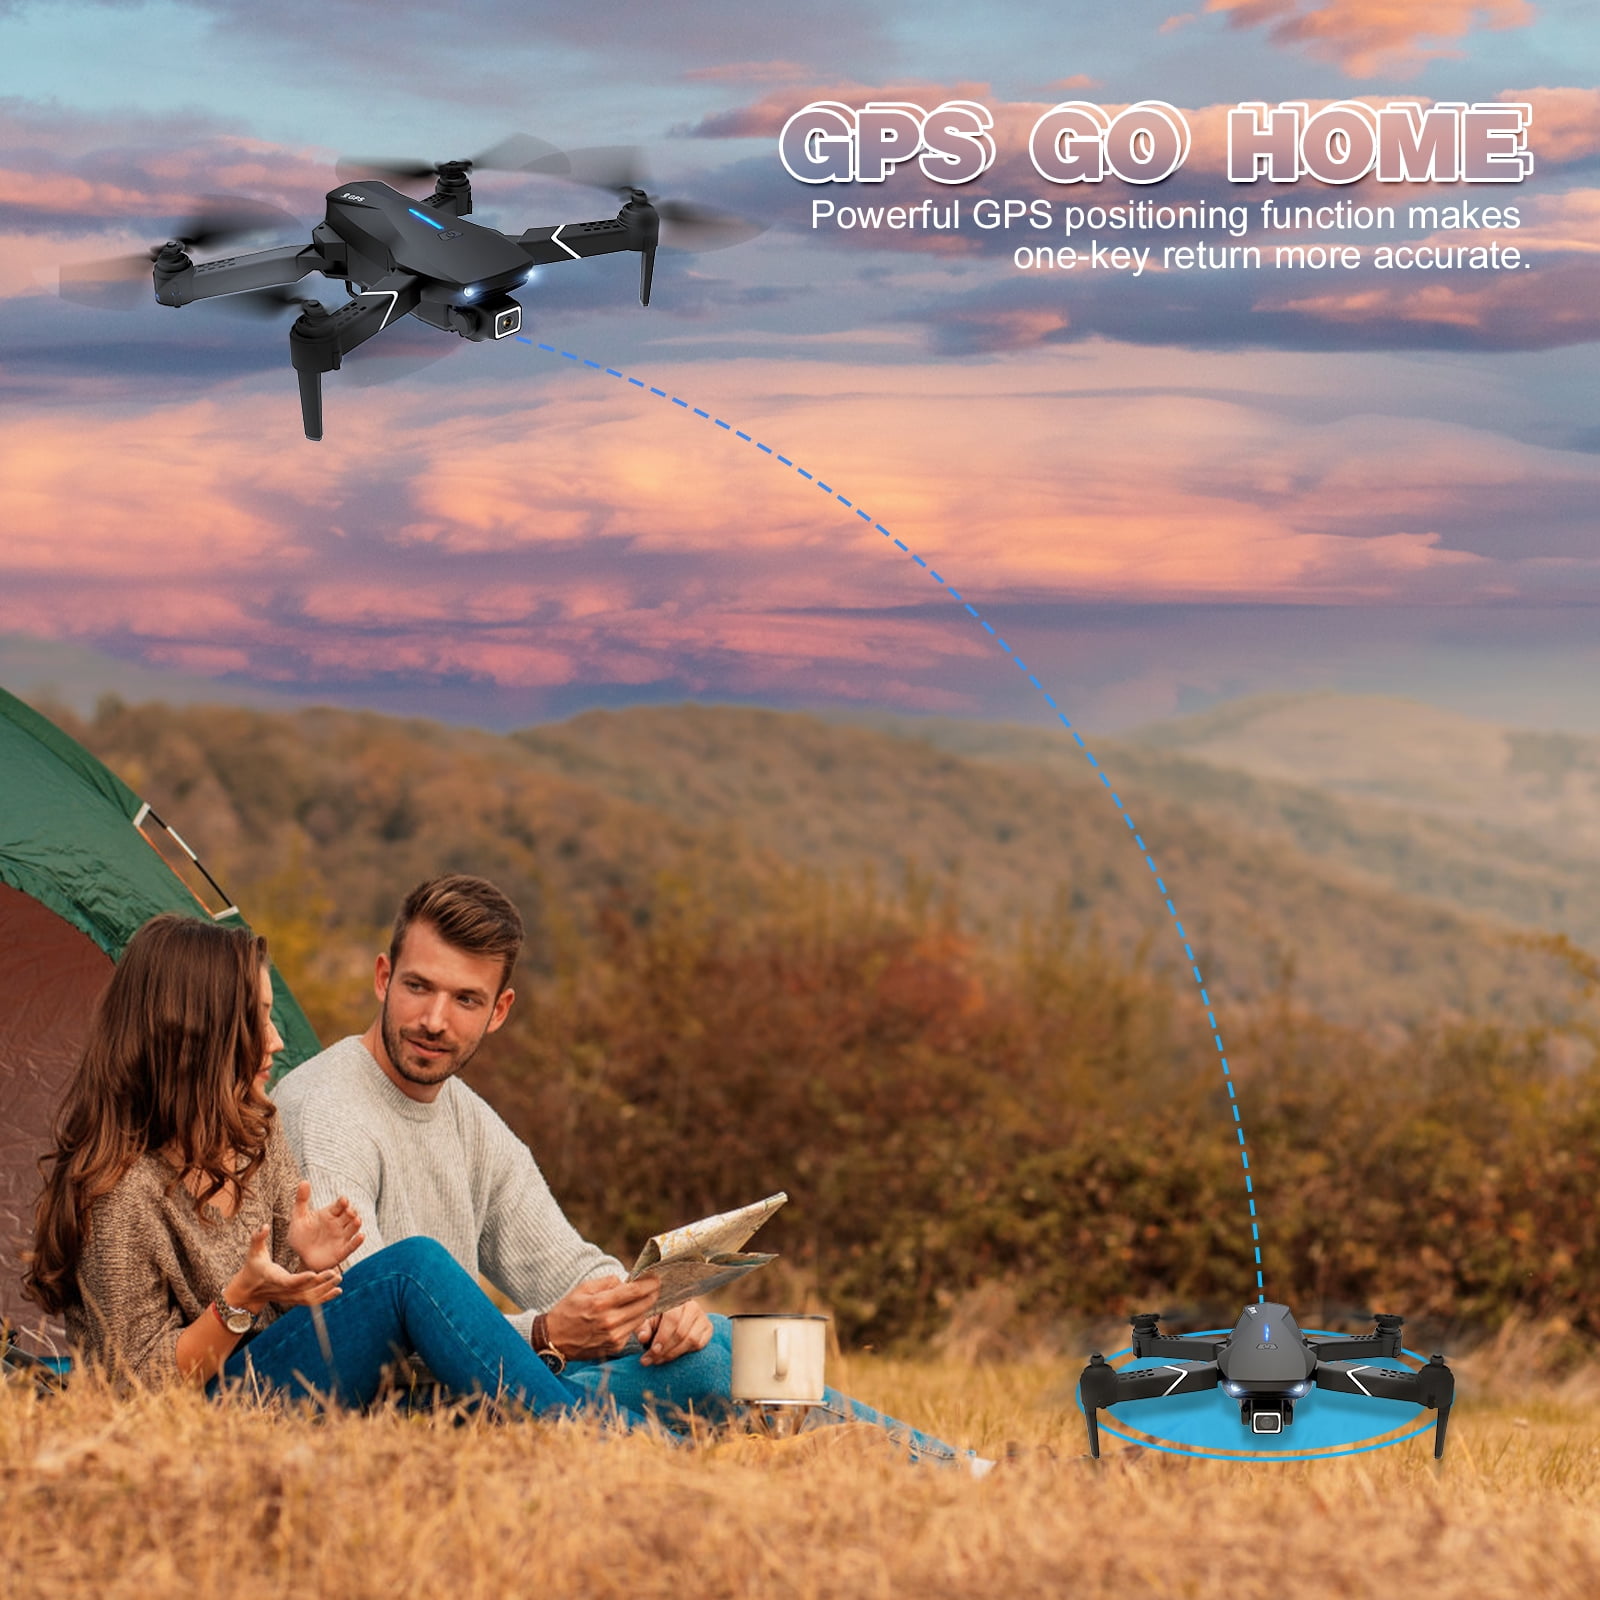 EACHINE E520S GPS Drones for Adults, 5G WIFI FPV Drones with Camera 4K, Follow Me, Waypoint Flight Mode, Foldable Drones Kids Men Gift Walmart.com